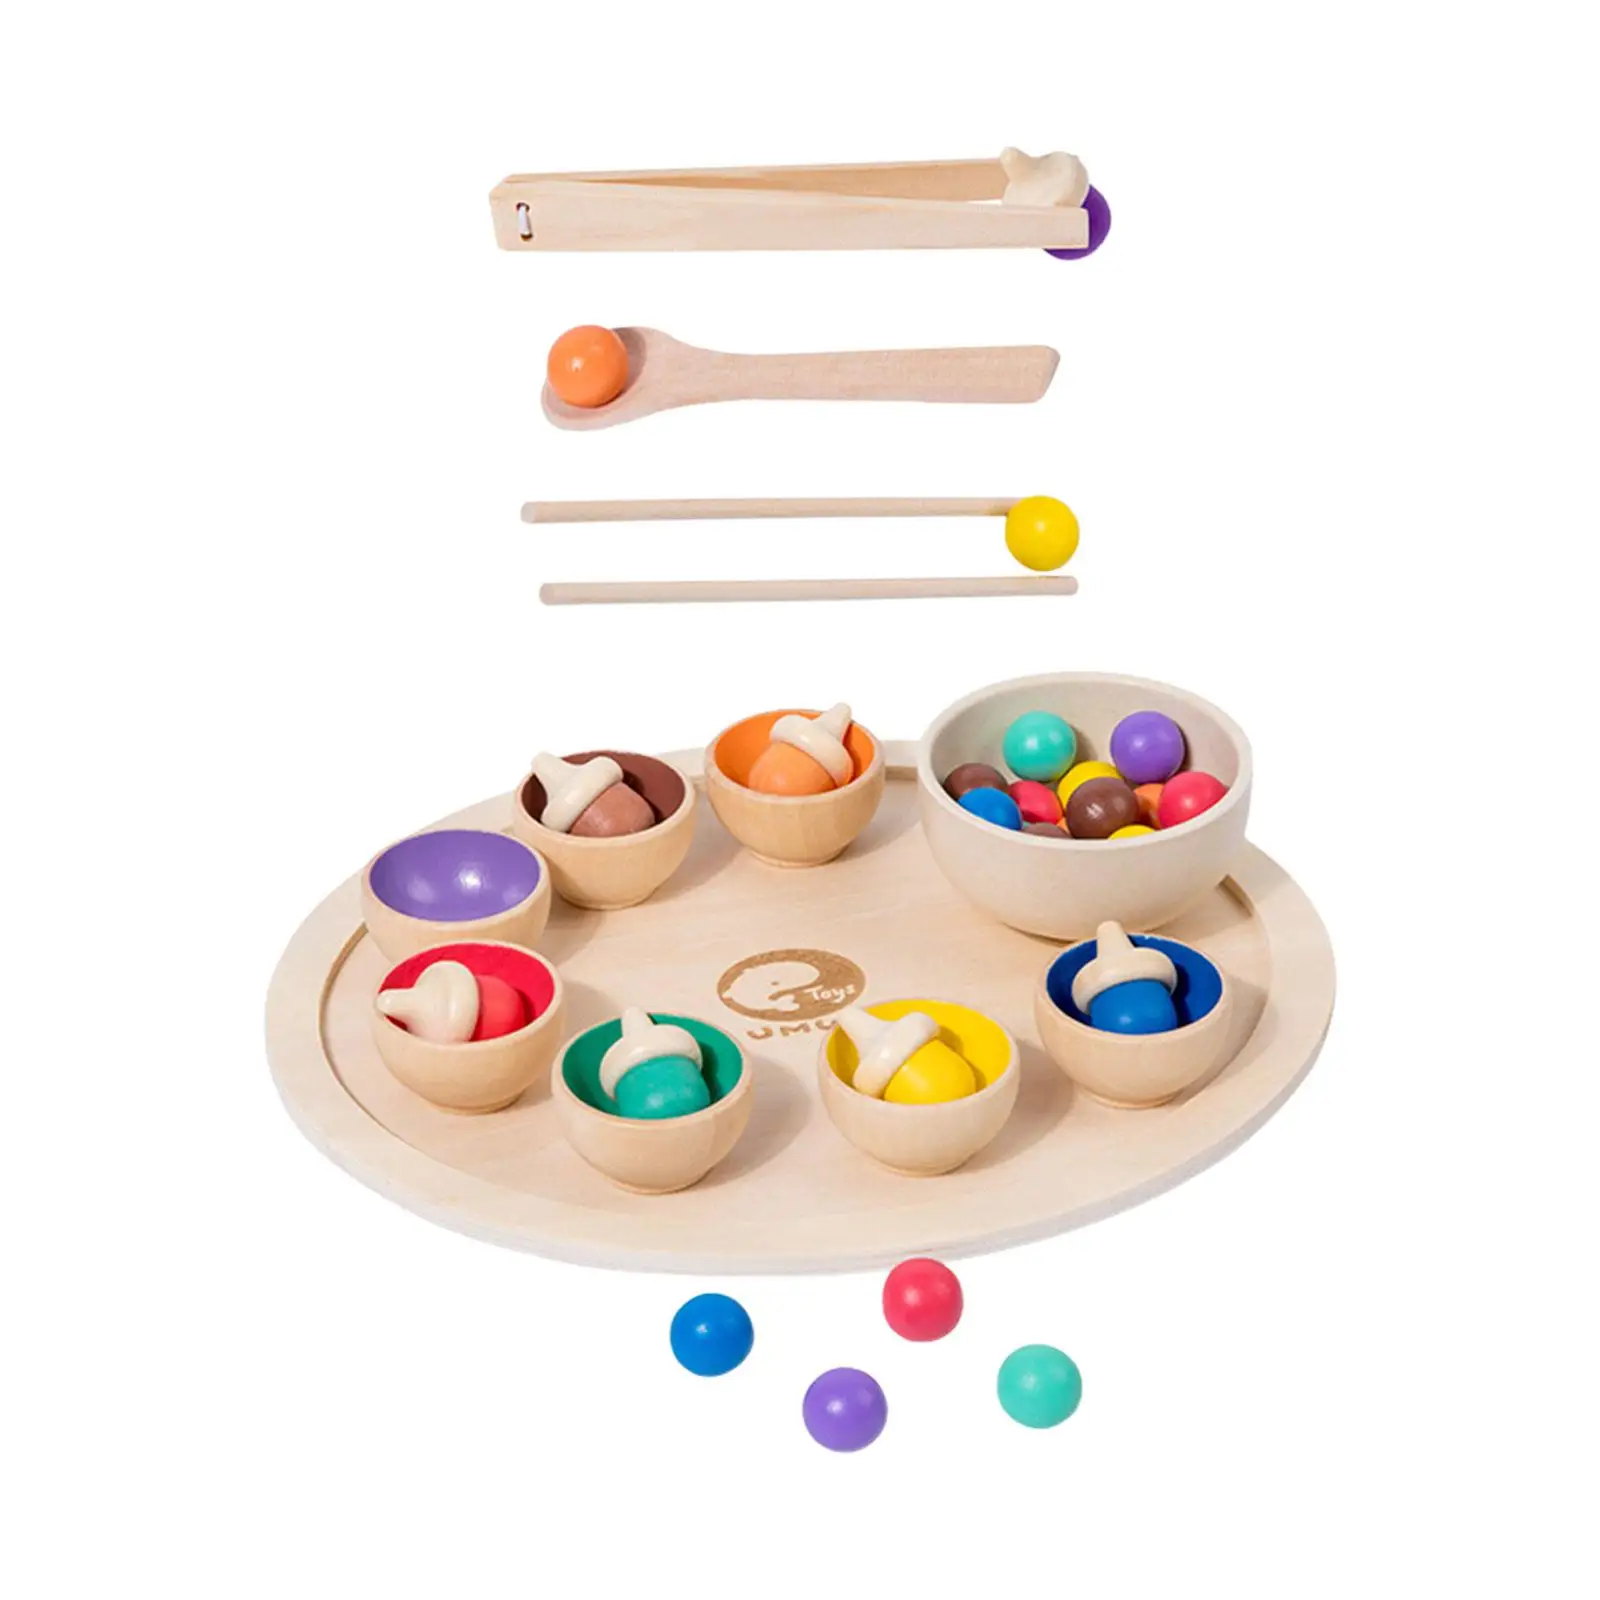 Wooden Rainbow Toys Color Classification Fine Motor Development Game Training Logical Thinking Wood Clip Beads for 1+ Year Old